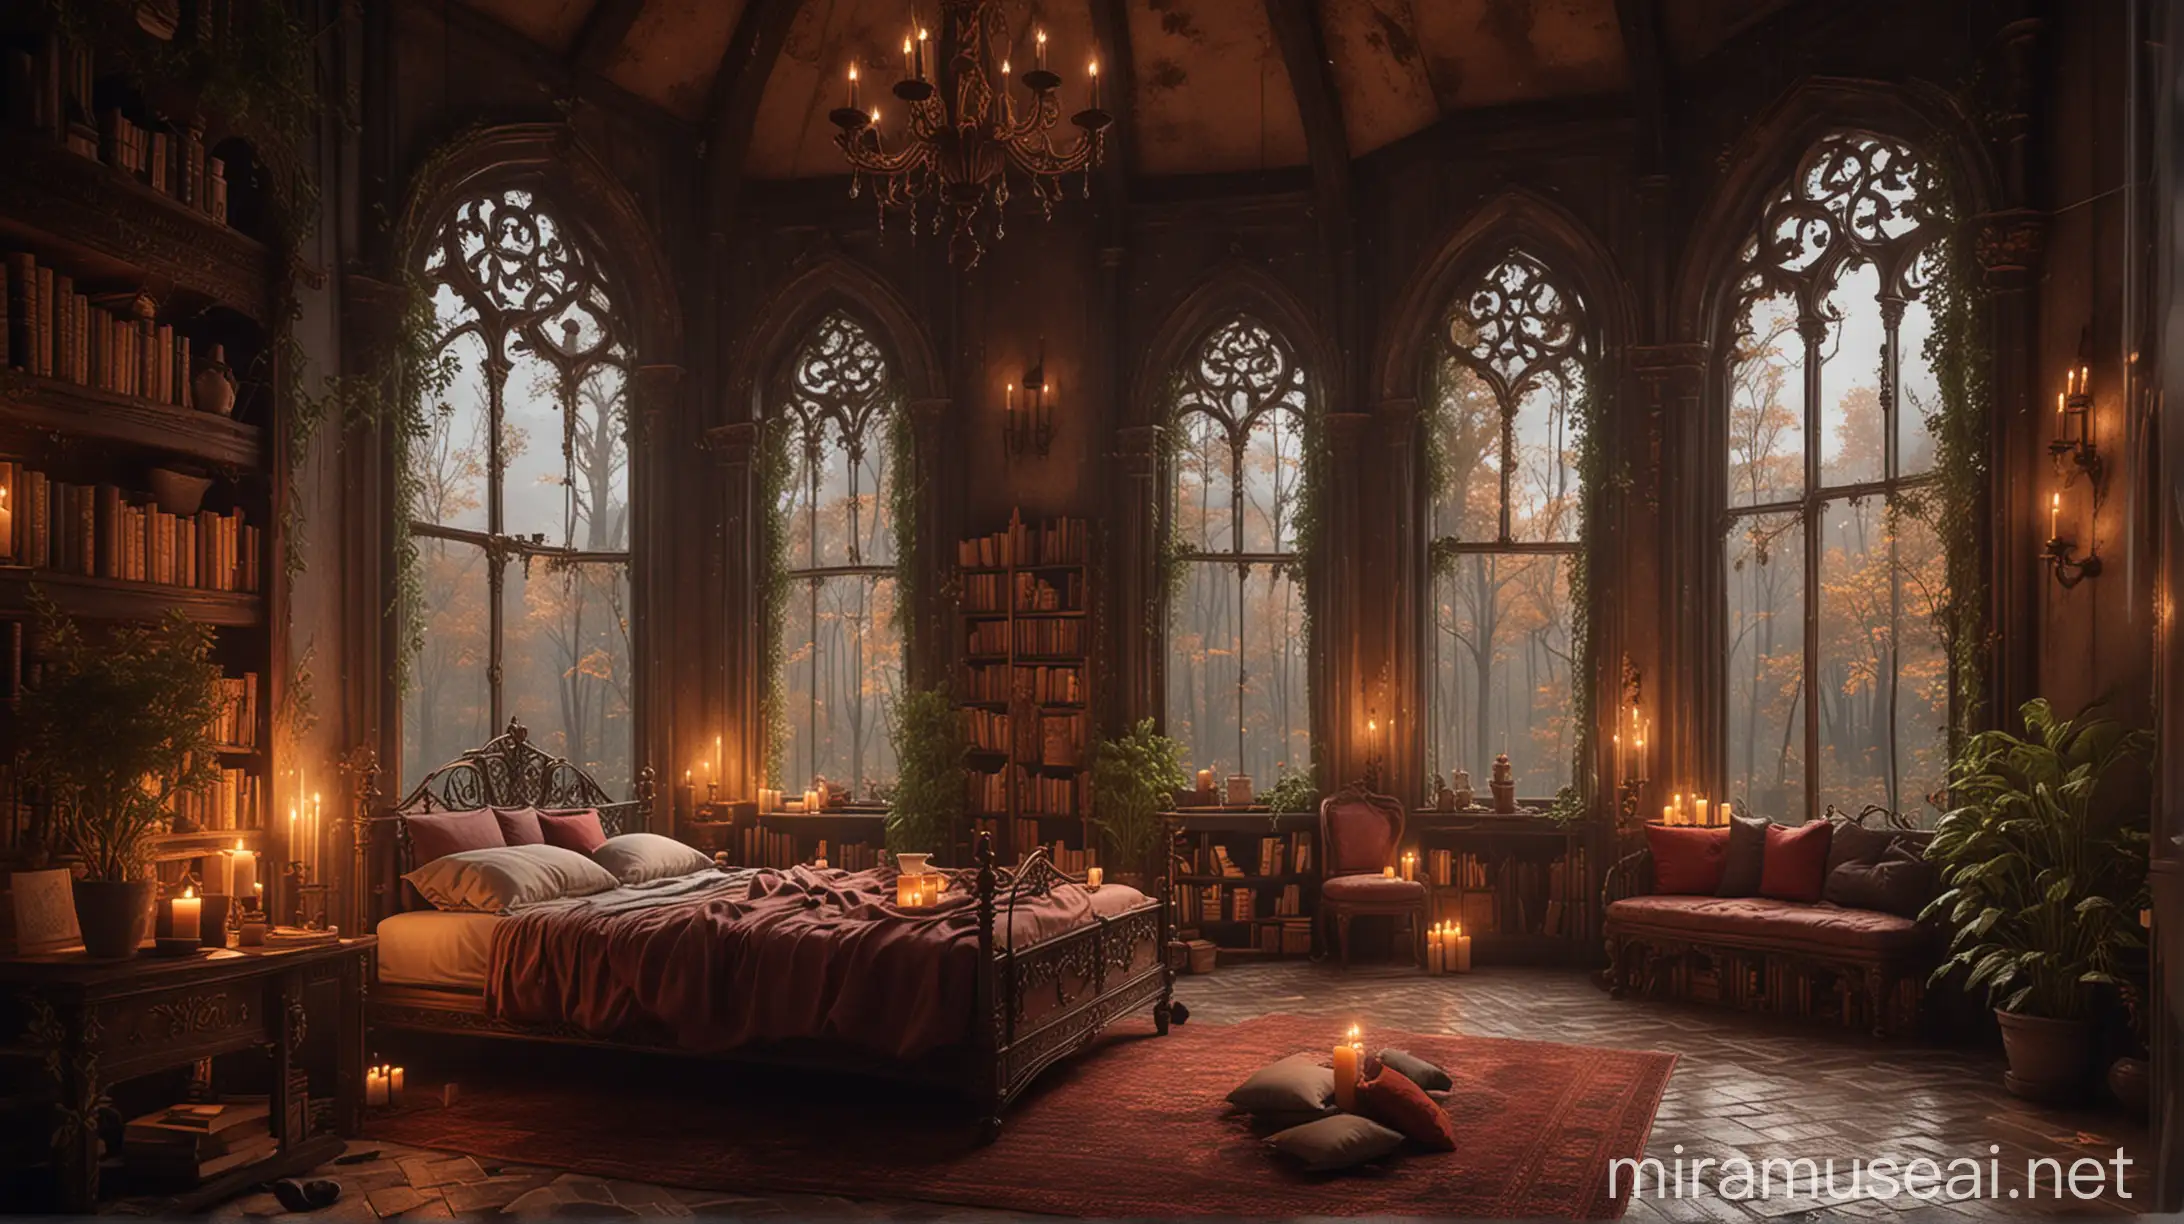 Cozy Castle Royal Mahal inside, with two small cozy plant, pillows, string lights,badroom, a fireplace, big window with a rainy fall night deep forest view., Mysterious room sia view lot of candle arafed room with a fireplace and a bed in it, cozy place, cosy atmoshpere, cozy environment, gothic epic library, gothic mansion room, cozy room, cozy and peaceful atmosphere, gothic epic library concept, cozy setting, cosy enchanted scene, magical environment, gothic library, cozy atmospheric, warm interior, castle library, cozy wallpaper, relaxing concept art